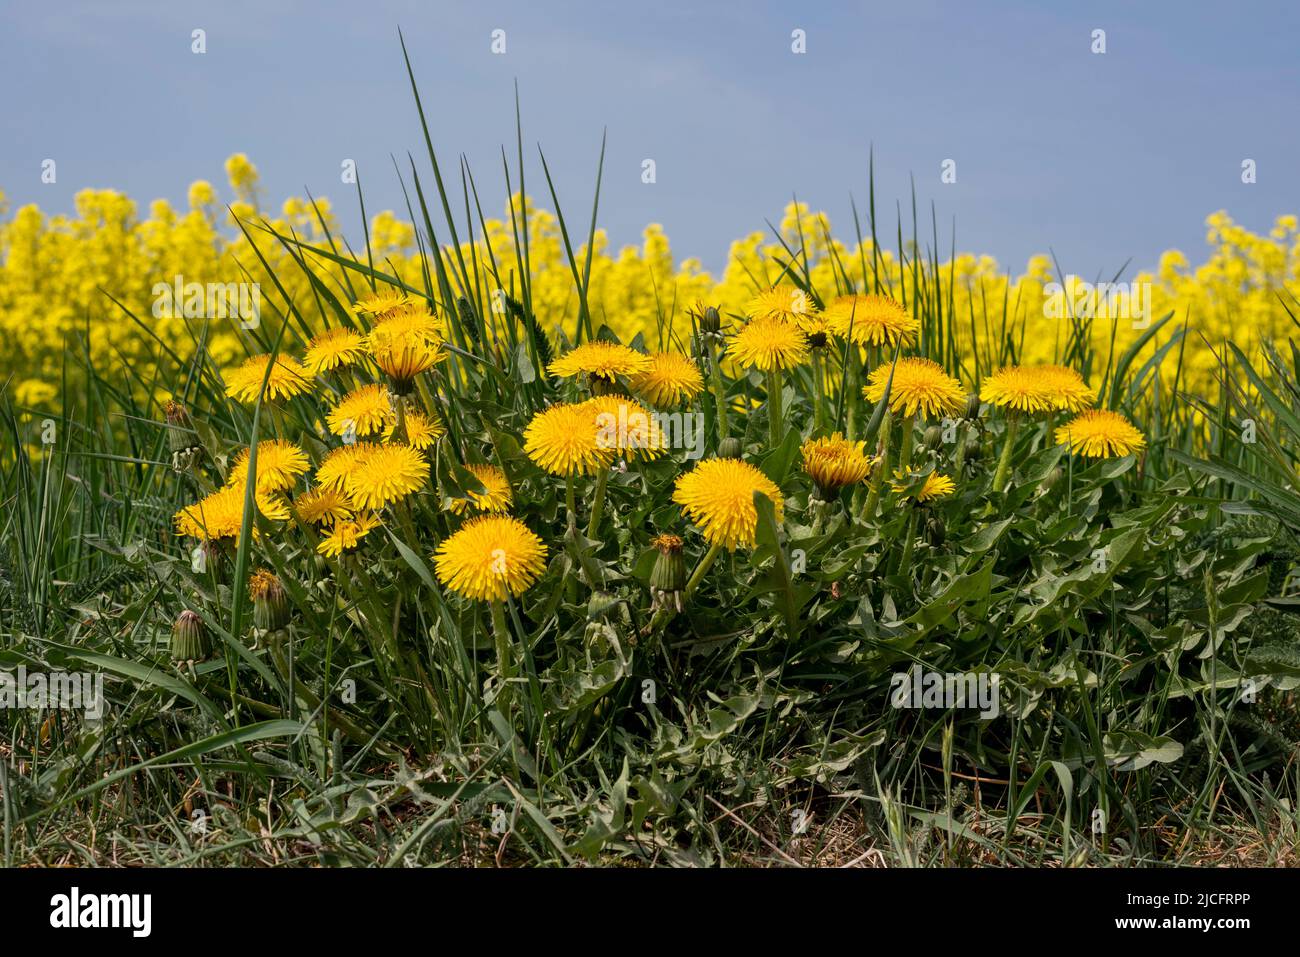 Blooming dandelion, behind it a yellow canola field. Stock Photo